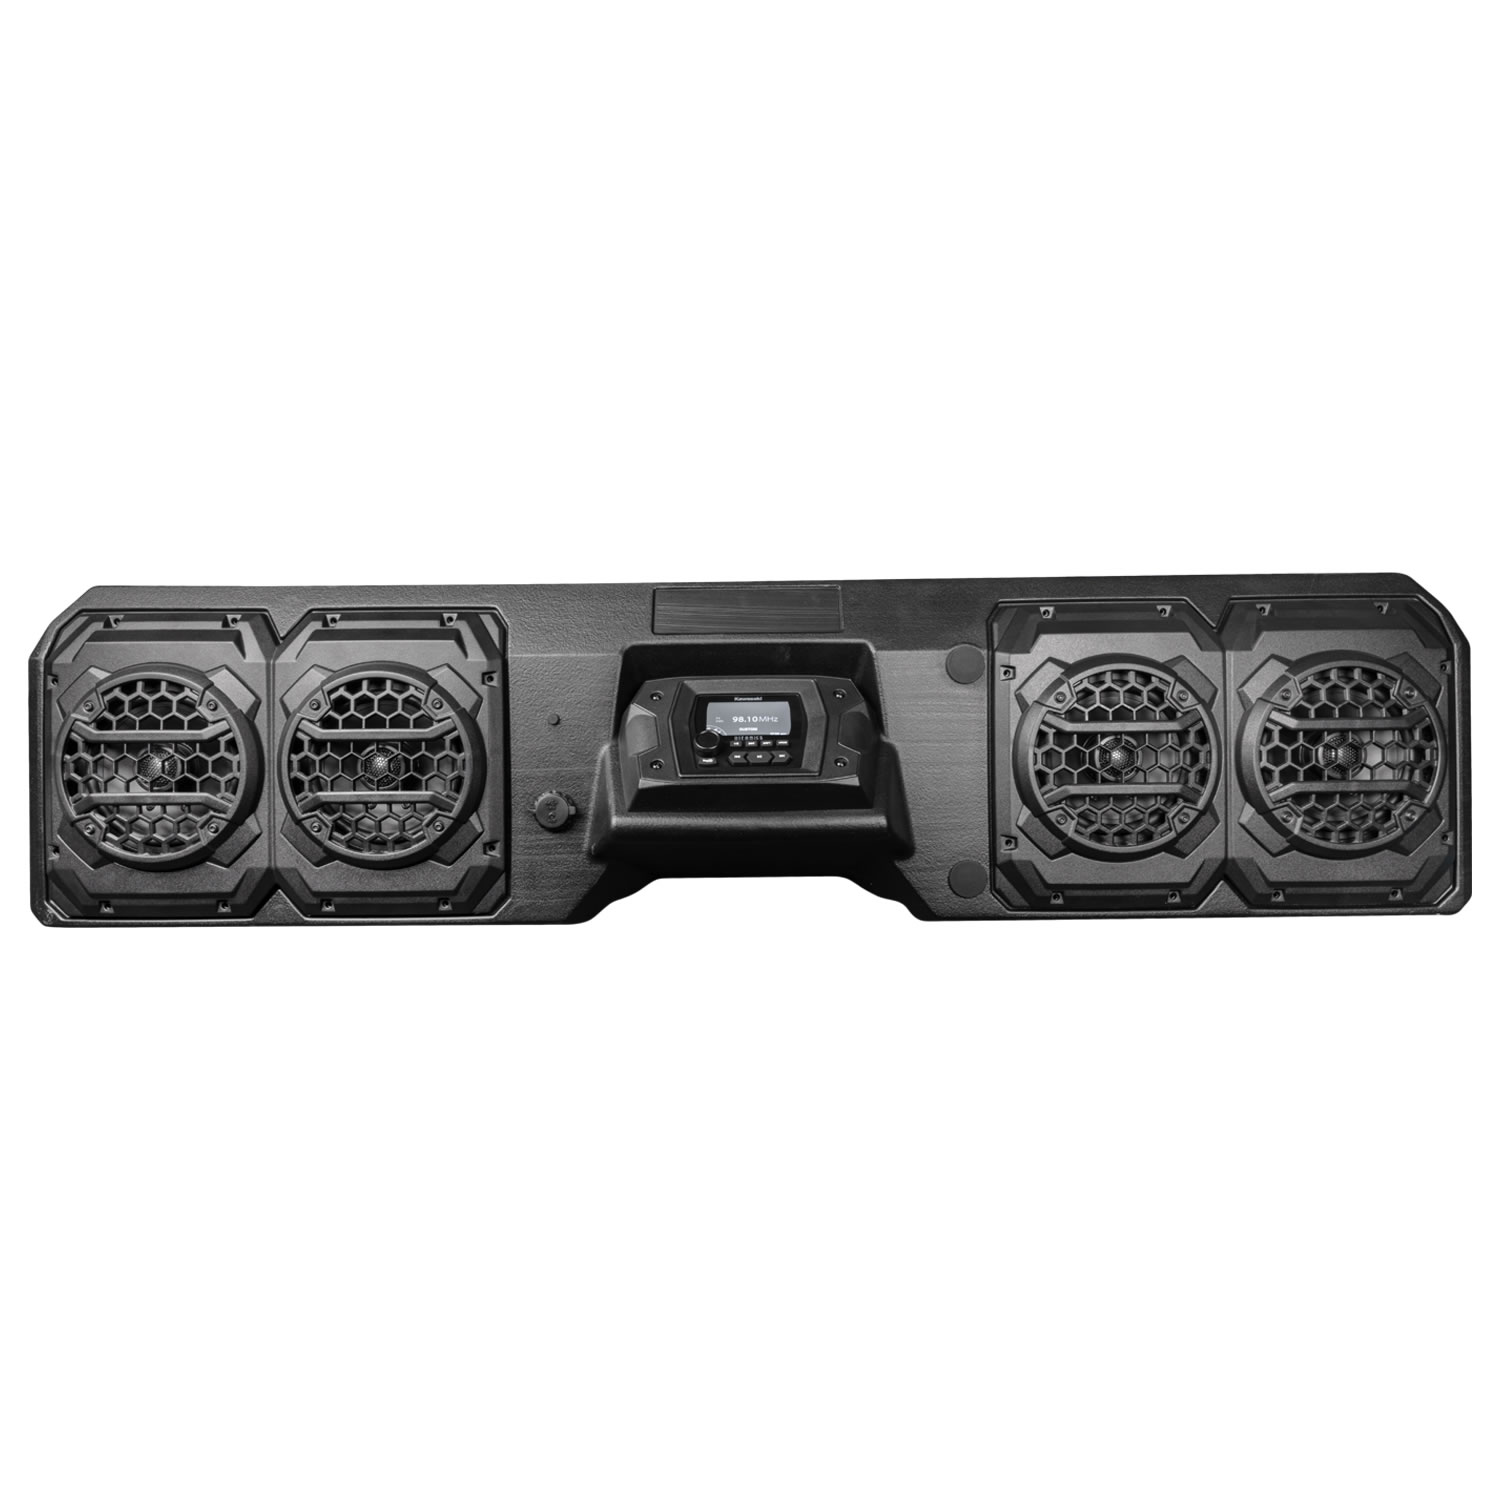 Kawasaki RIDGE Stage 1 Visor Audio System with Built-In Source Unit (99994-1777)